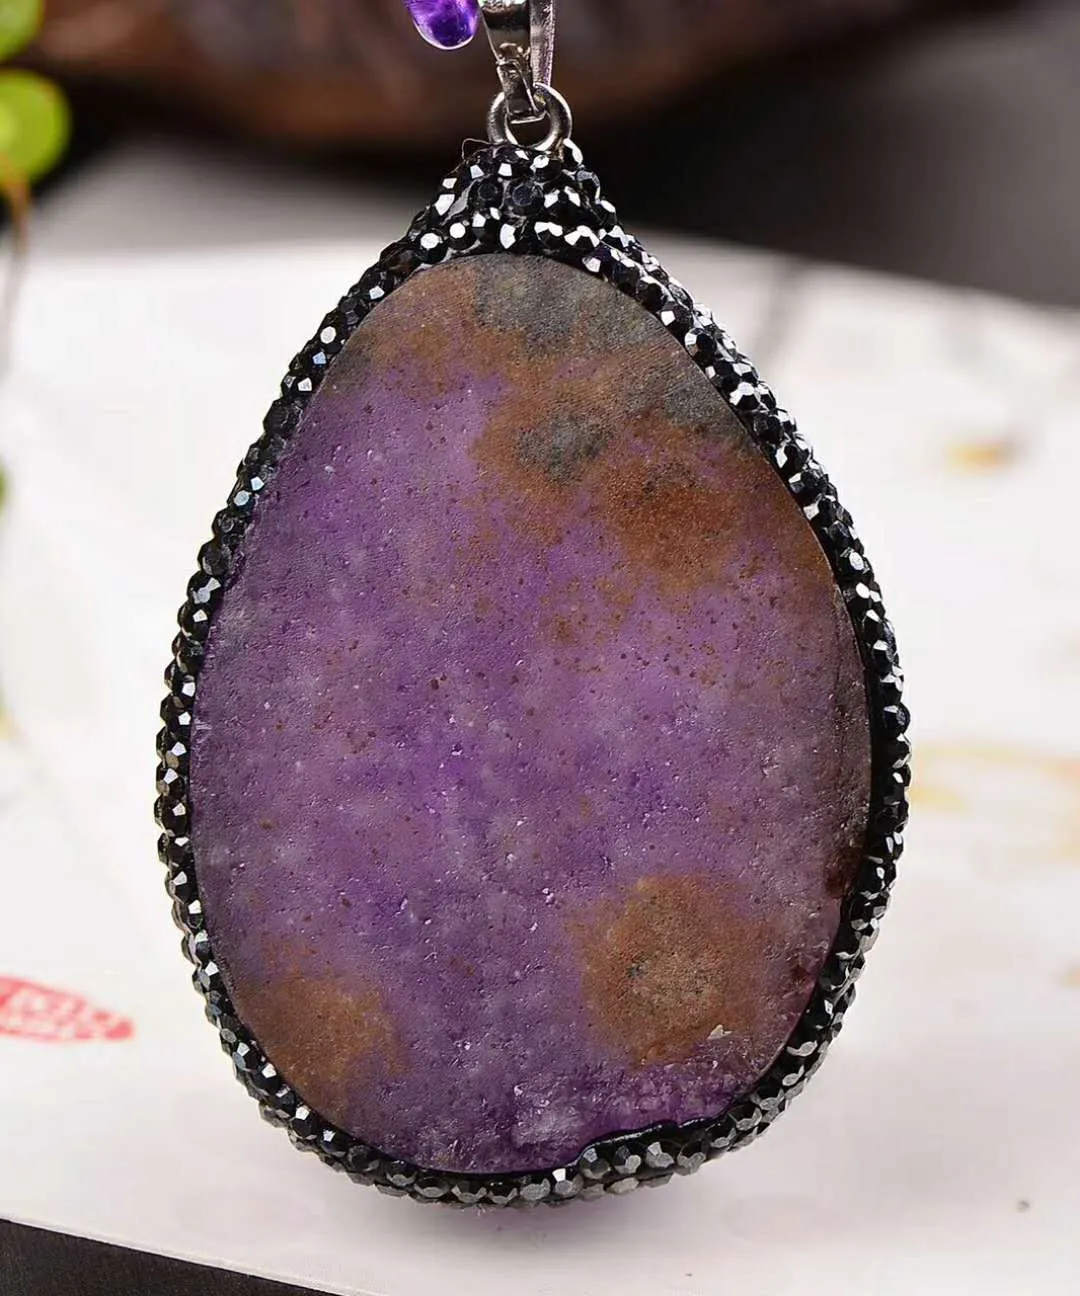 lovely beautiful Natural amethyst cluster pendant agate crystal necklace special crystal haling crystal giftcolor purple4932196